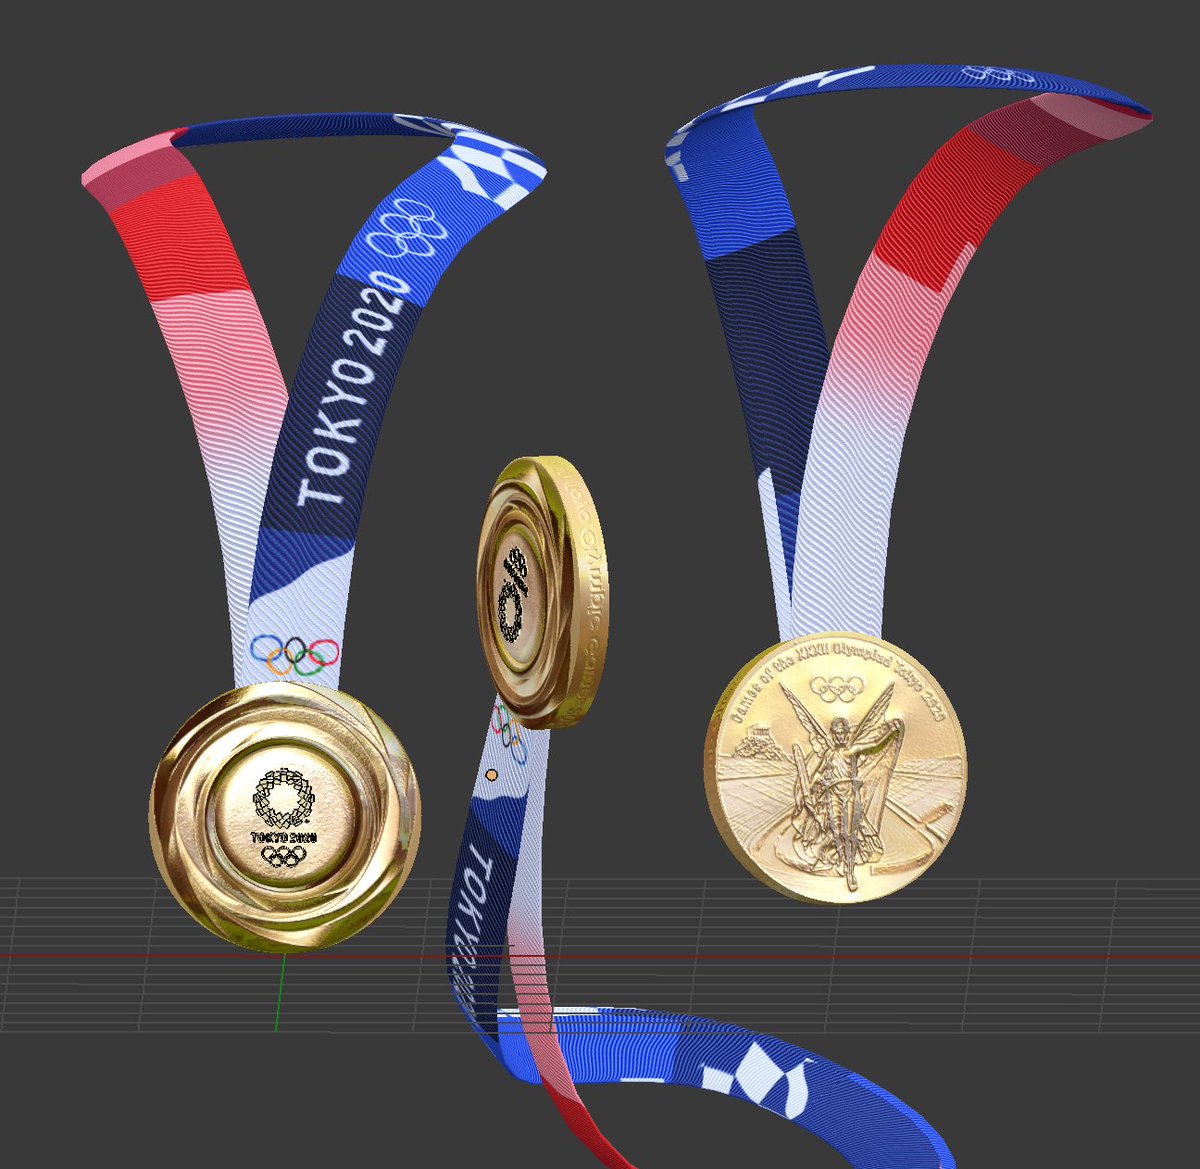 Nibroc.Rock Twitter Tweet: A look at this Tokyo 2020 Gold Medal I modeled... for sonic stuff,

It Feels strange just making a real thing for Sonic purposes,

I wonder if I were to put this on a model hosting site if people would pay for it, pfft. https://t.co/Hq487bkSWe